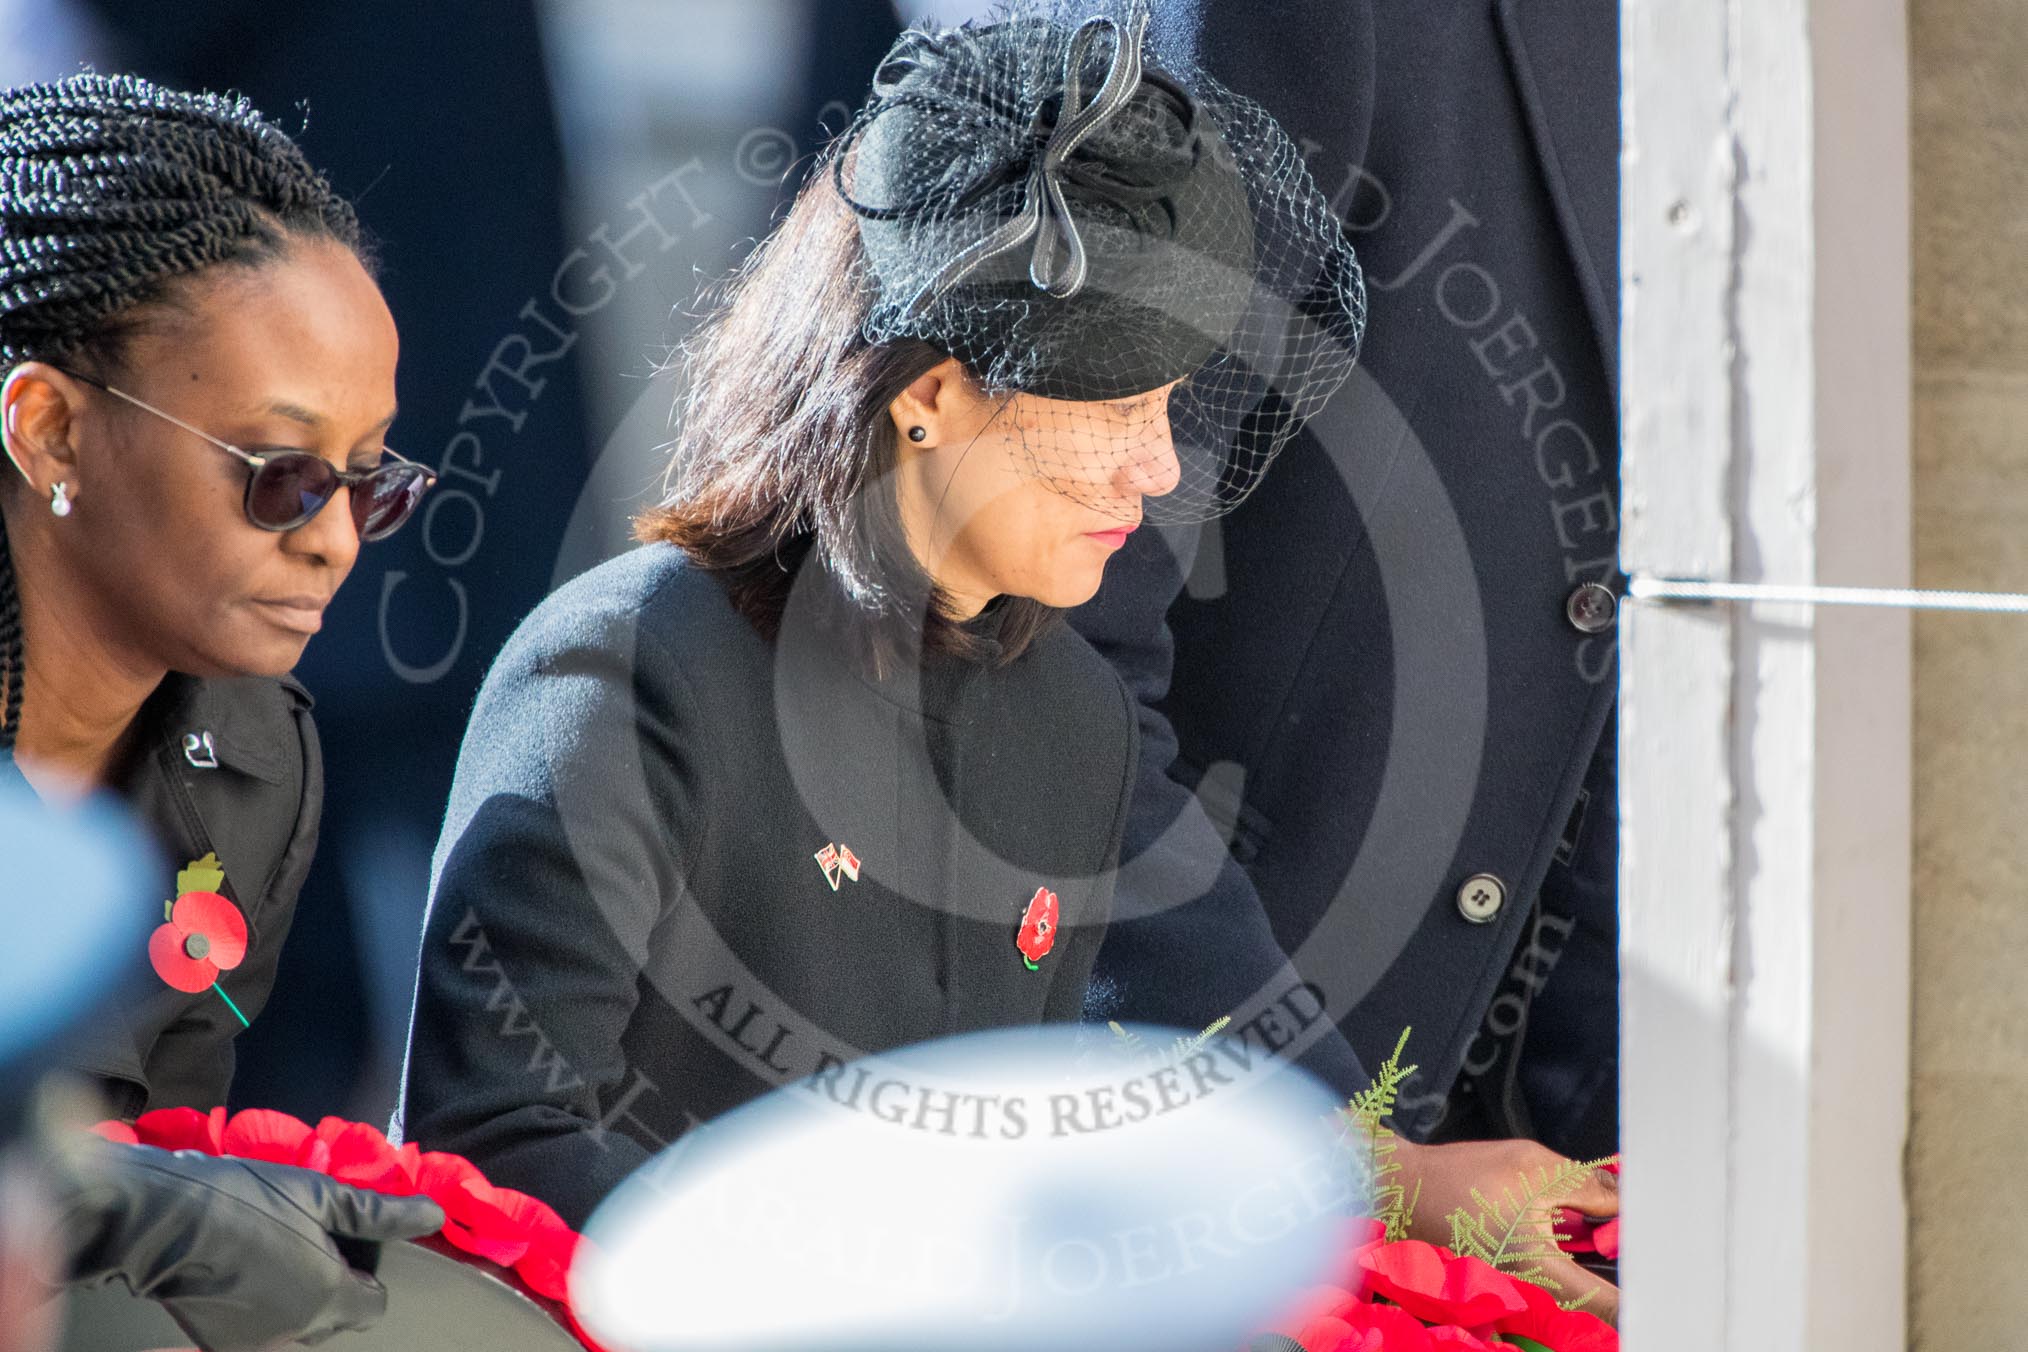 The High Commissioner of Guyana and the  High Commissioner of Singapore, Ms Foo Chi Hsia , during Remembrance Sunday Cenotaph Ceremony 2018 at Horse Guards Parade, Westminster, London, 11 November 2018, 11:13.